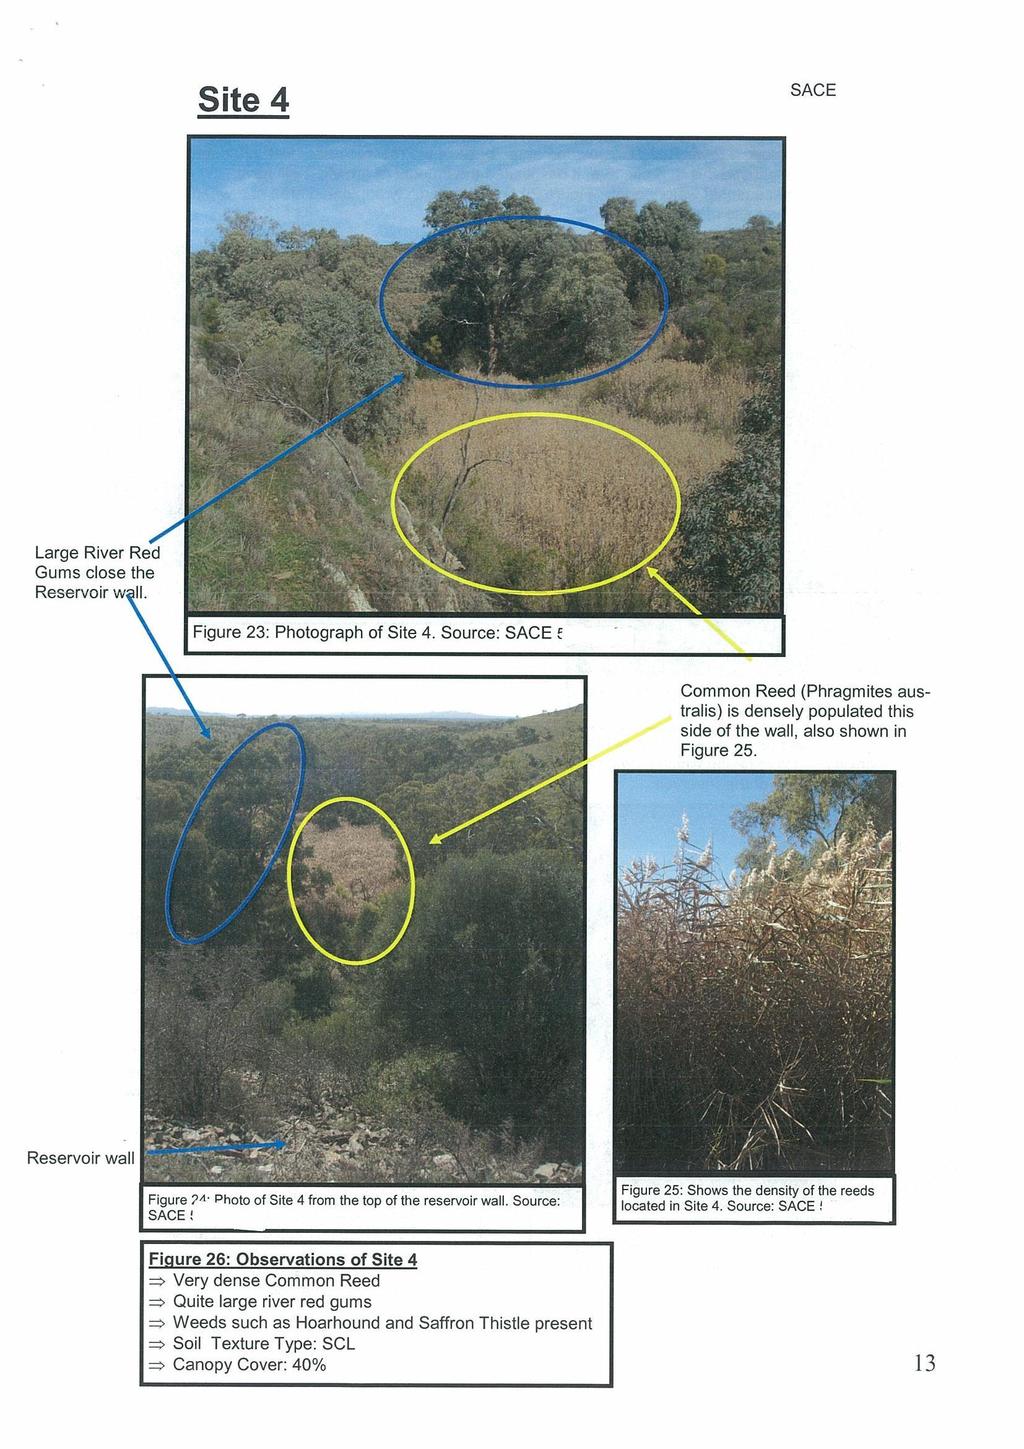 Figure 23: Photograph of Site 4. Source: Student.